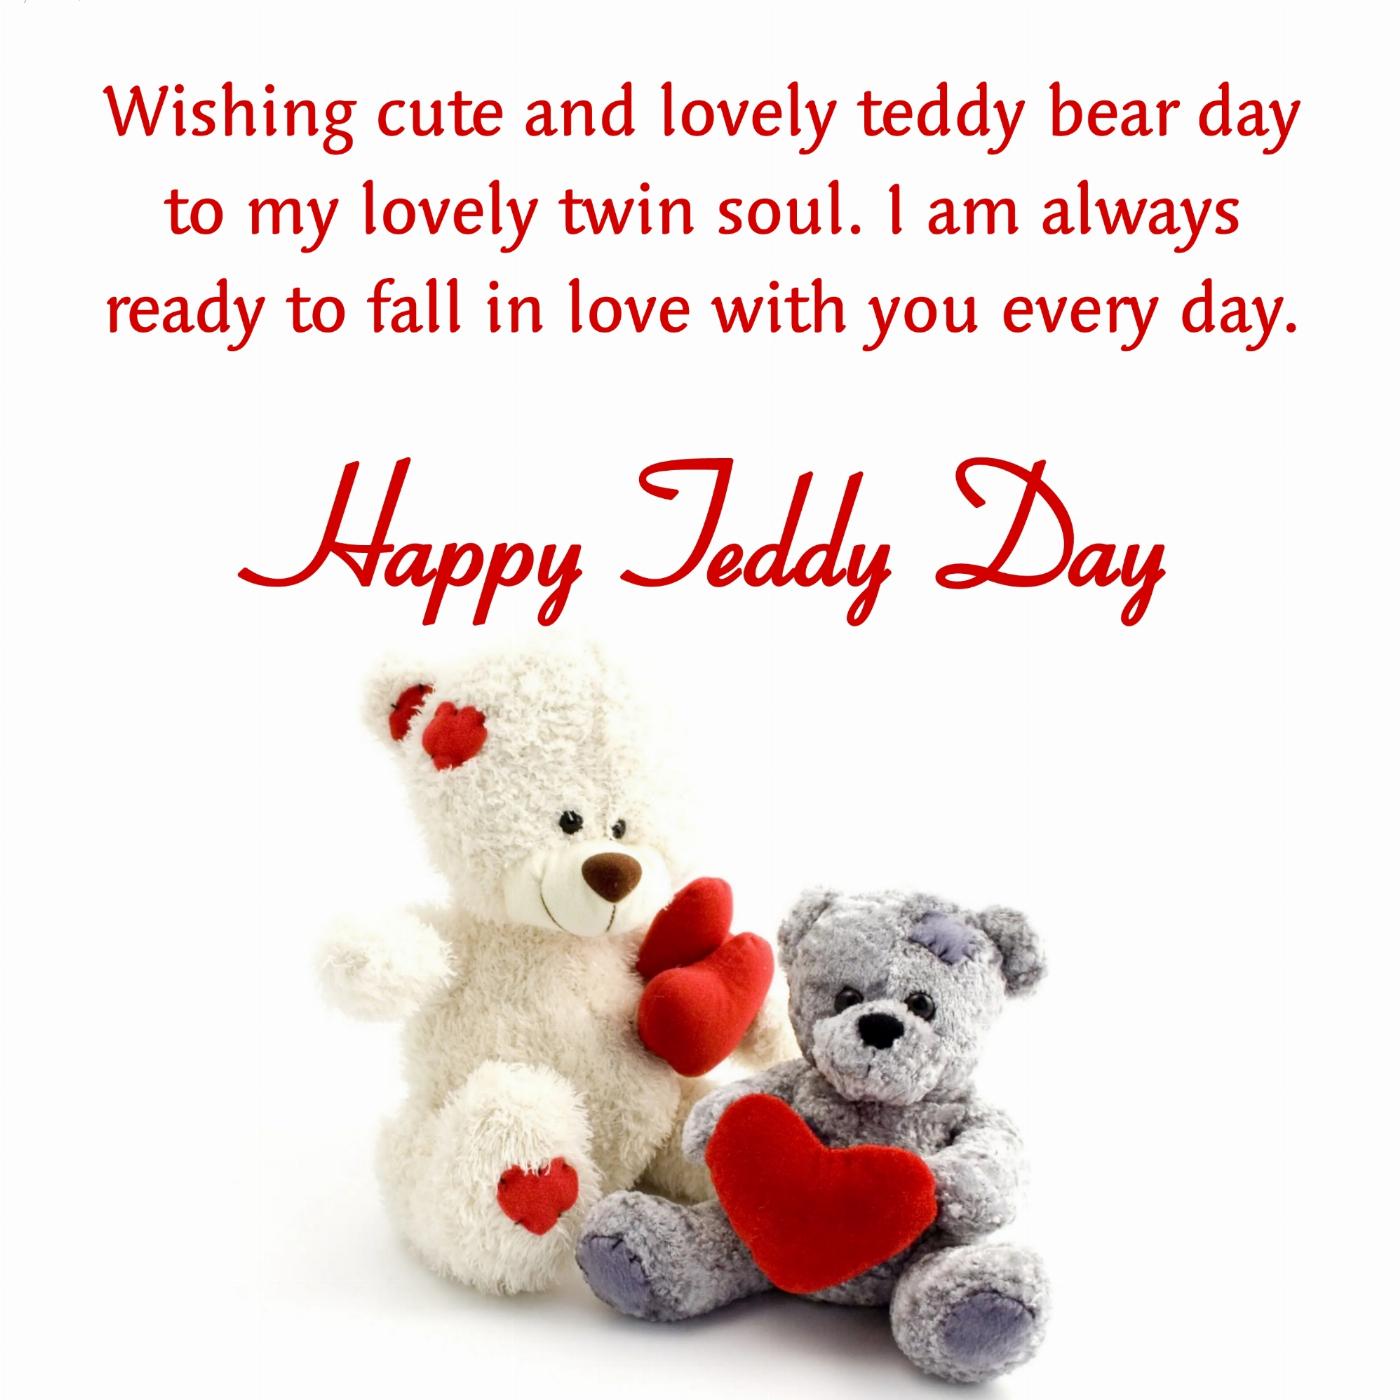 Wishing cute and lovely teddy bear day to my lovely twin soul